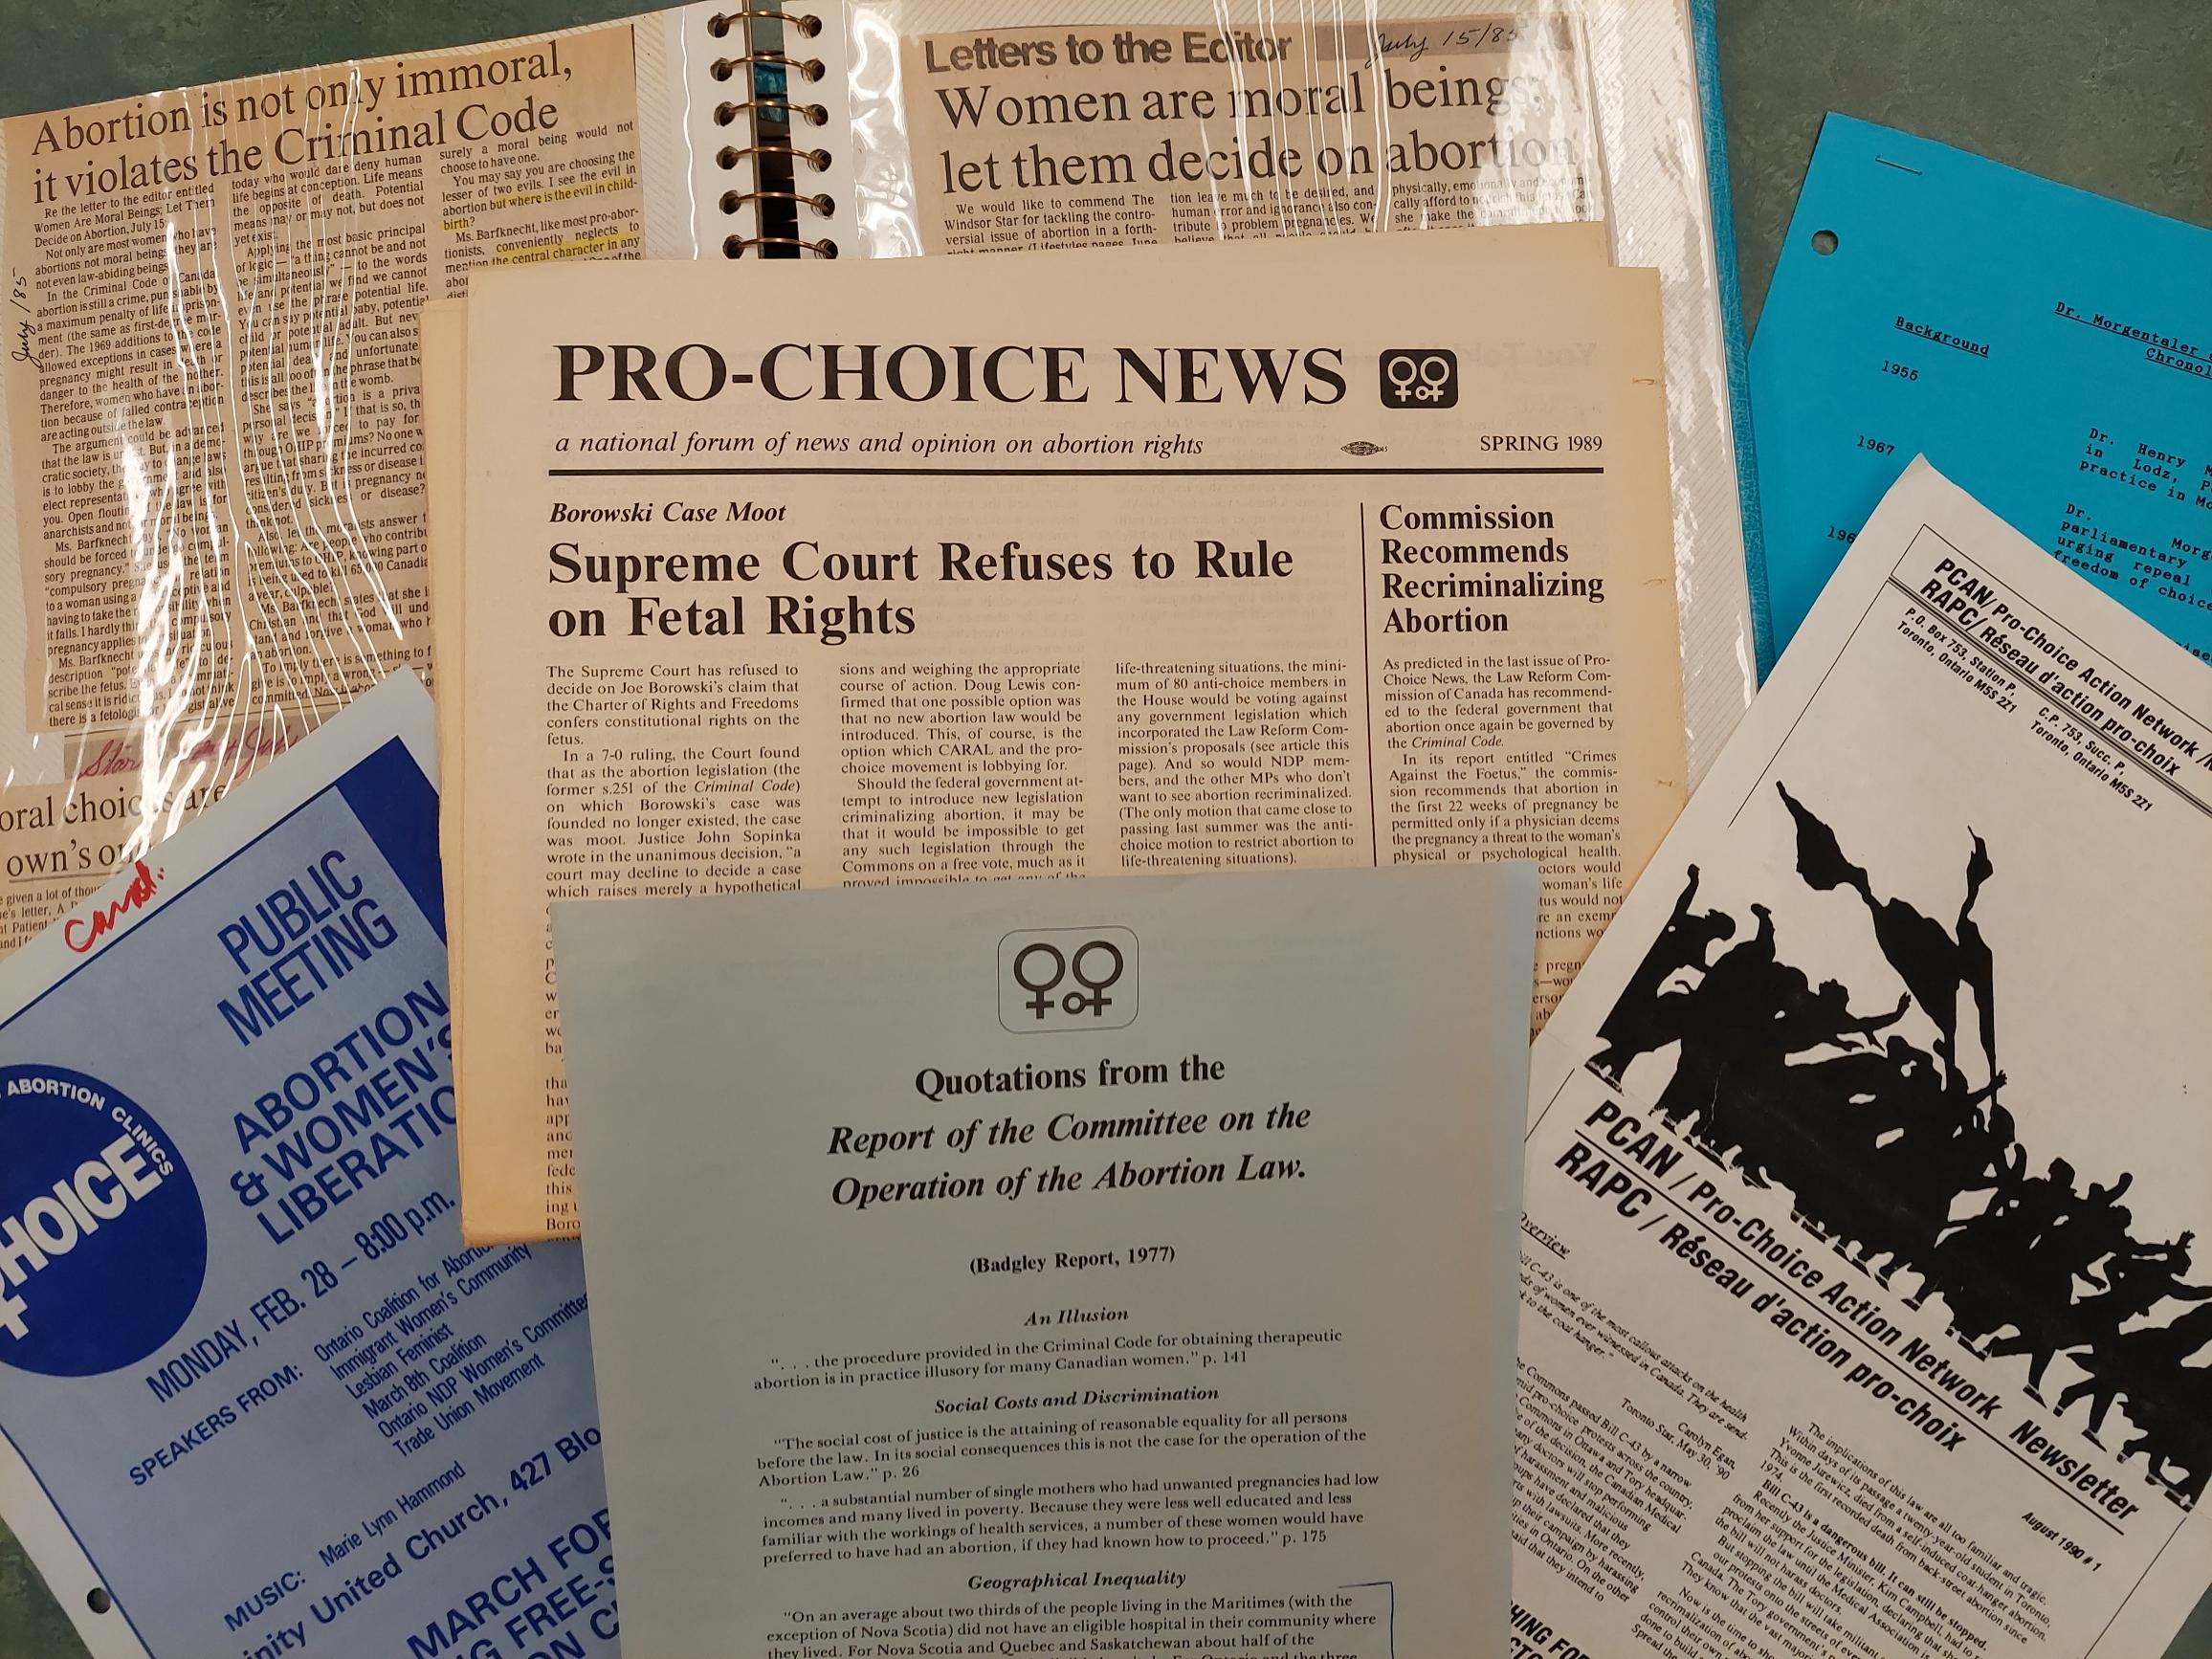 Archival documents and newspaper clippings displaying headlines that support either pro-choice or pro-life perspectives on abortion